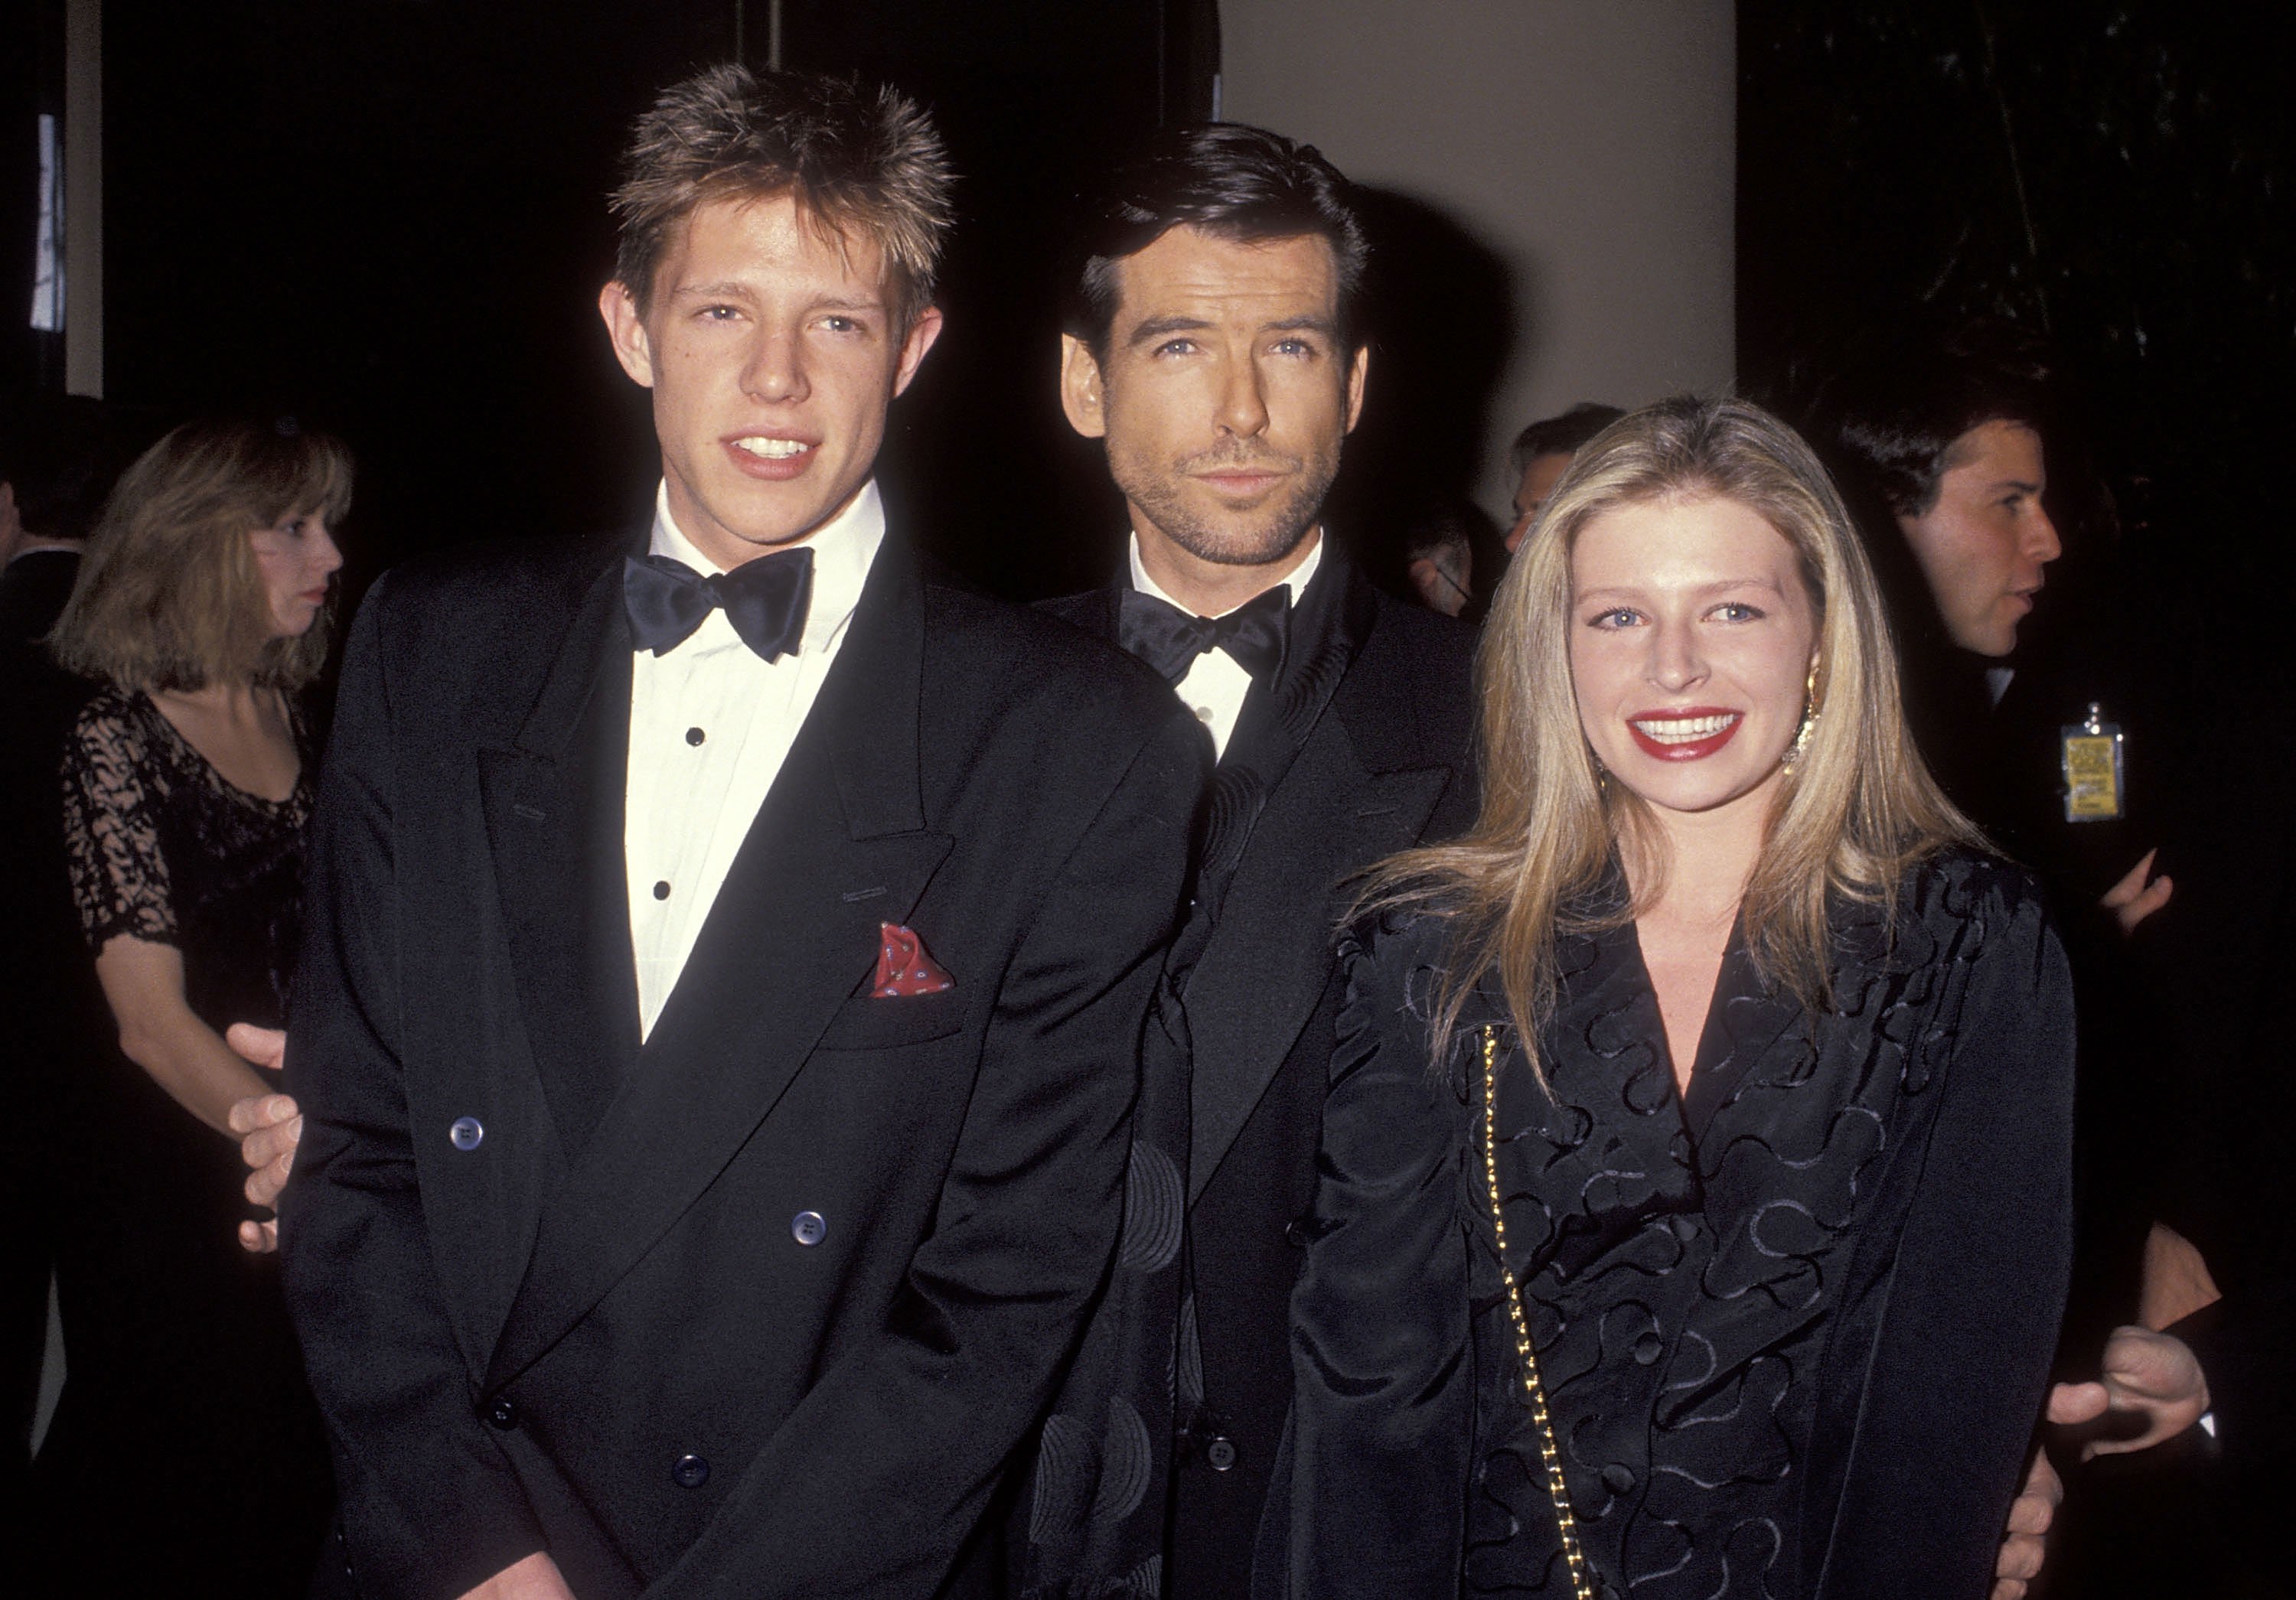 Actor Pierce Brosnan, son Christopher Brosnan and daughter Charlotte Brosnan attend the 49th Annual Golden Globe Awards on January 18, 1992 at Beverly Hilton Hotel in Beverly Hills, California. | Source: Getty Images